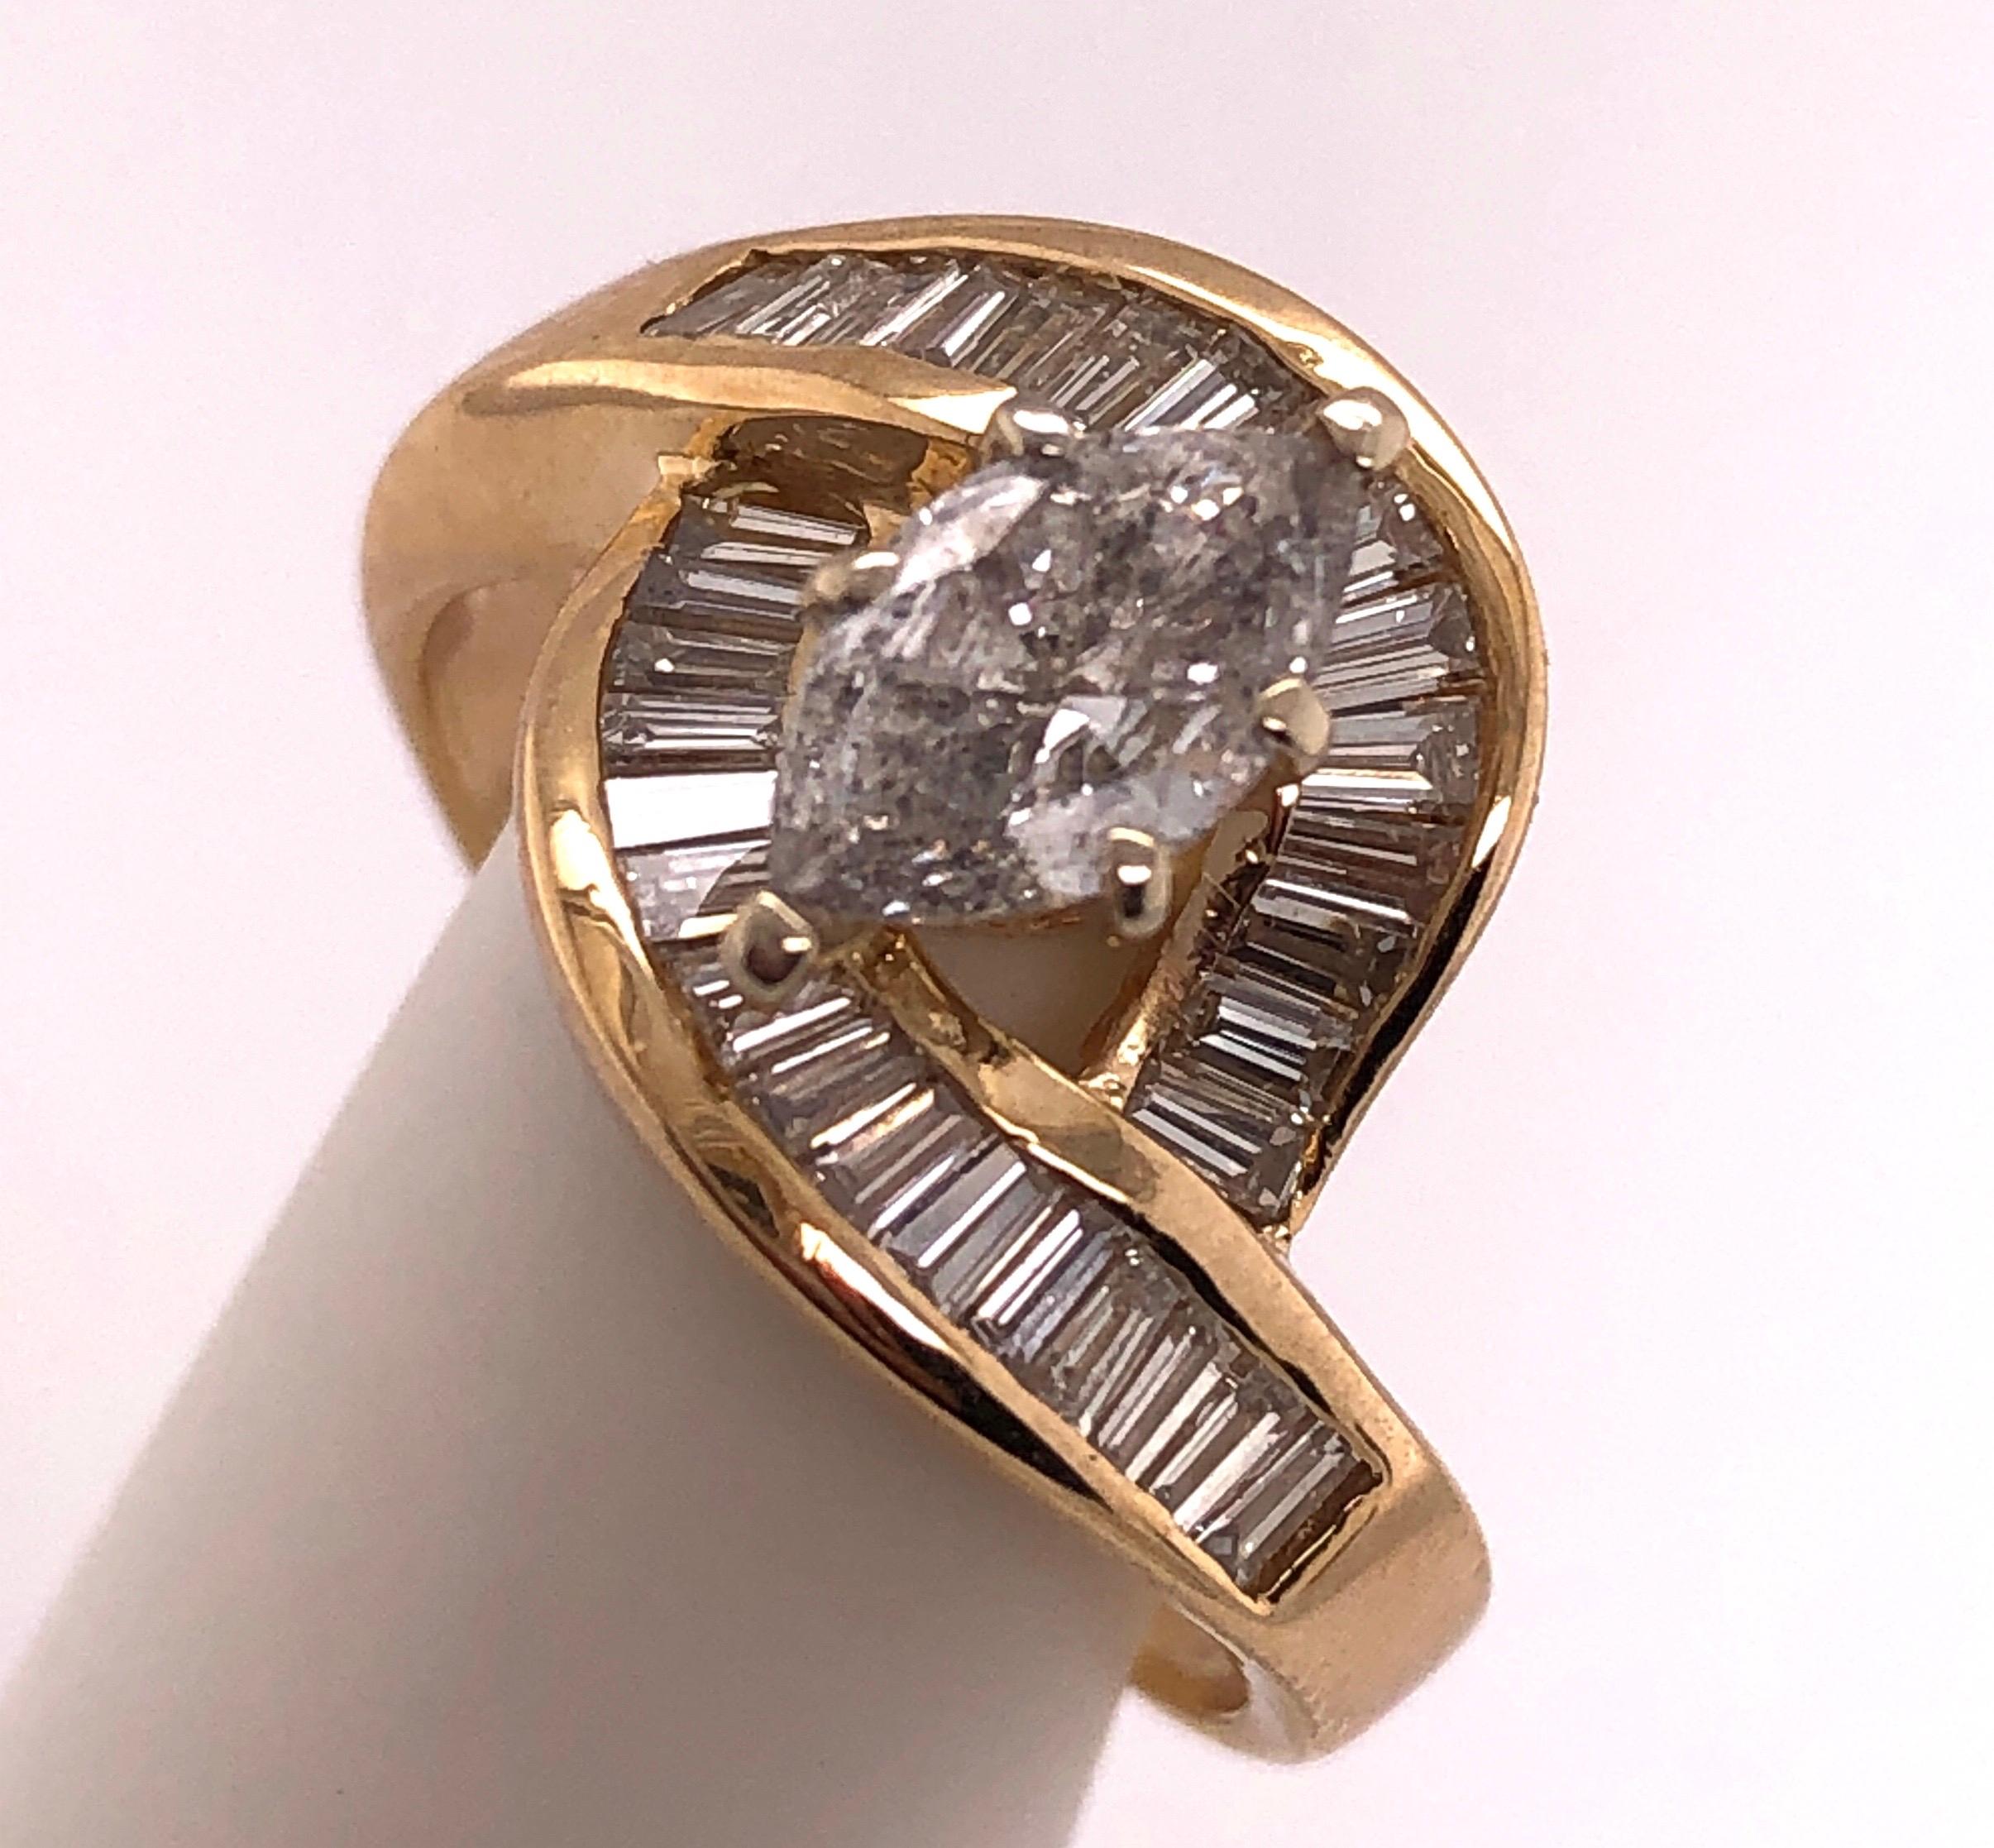 Yellow Gold Free Style Ring with Diamonds.
 0.75 carat center diamond and 34 pcs. baguette diamonds
Size 7.75 with 5.6 grams total weight